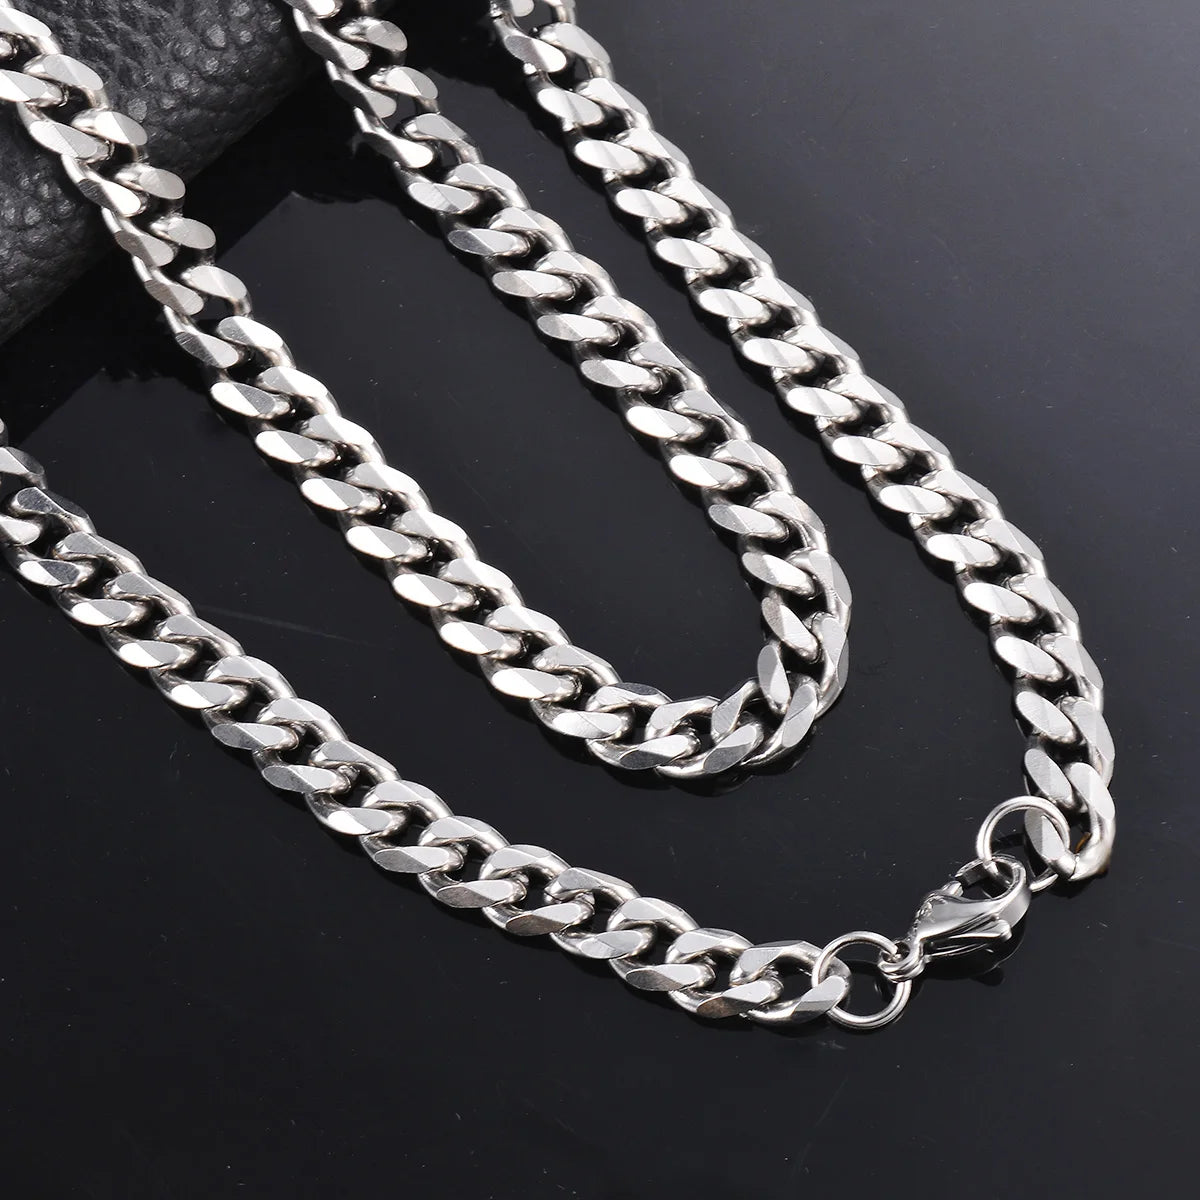 1 piece Size 3.6mm-9mm Men's Necklace: Stainless Steel Cuban Link Chain Bracelet Necklace, Steel Color Male Jewelry.